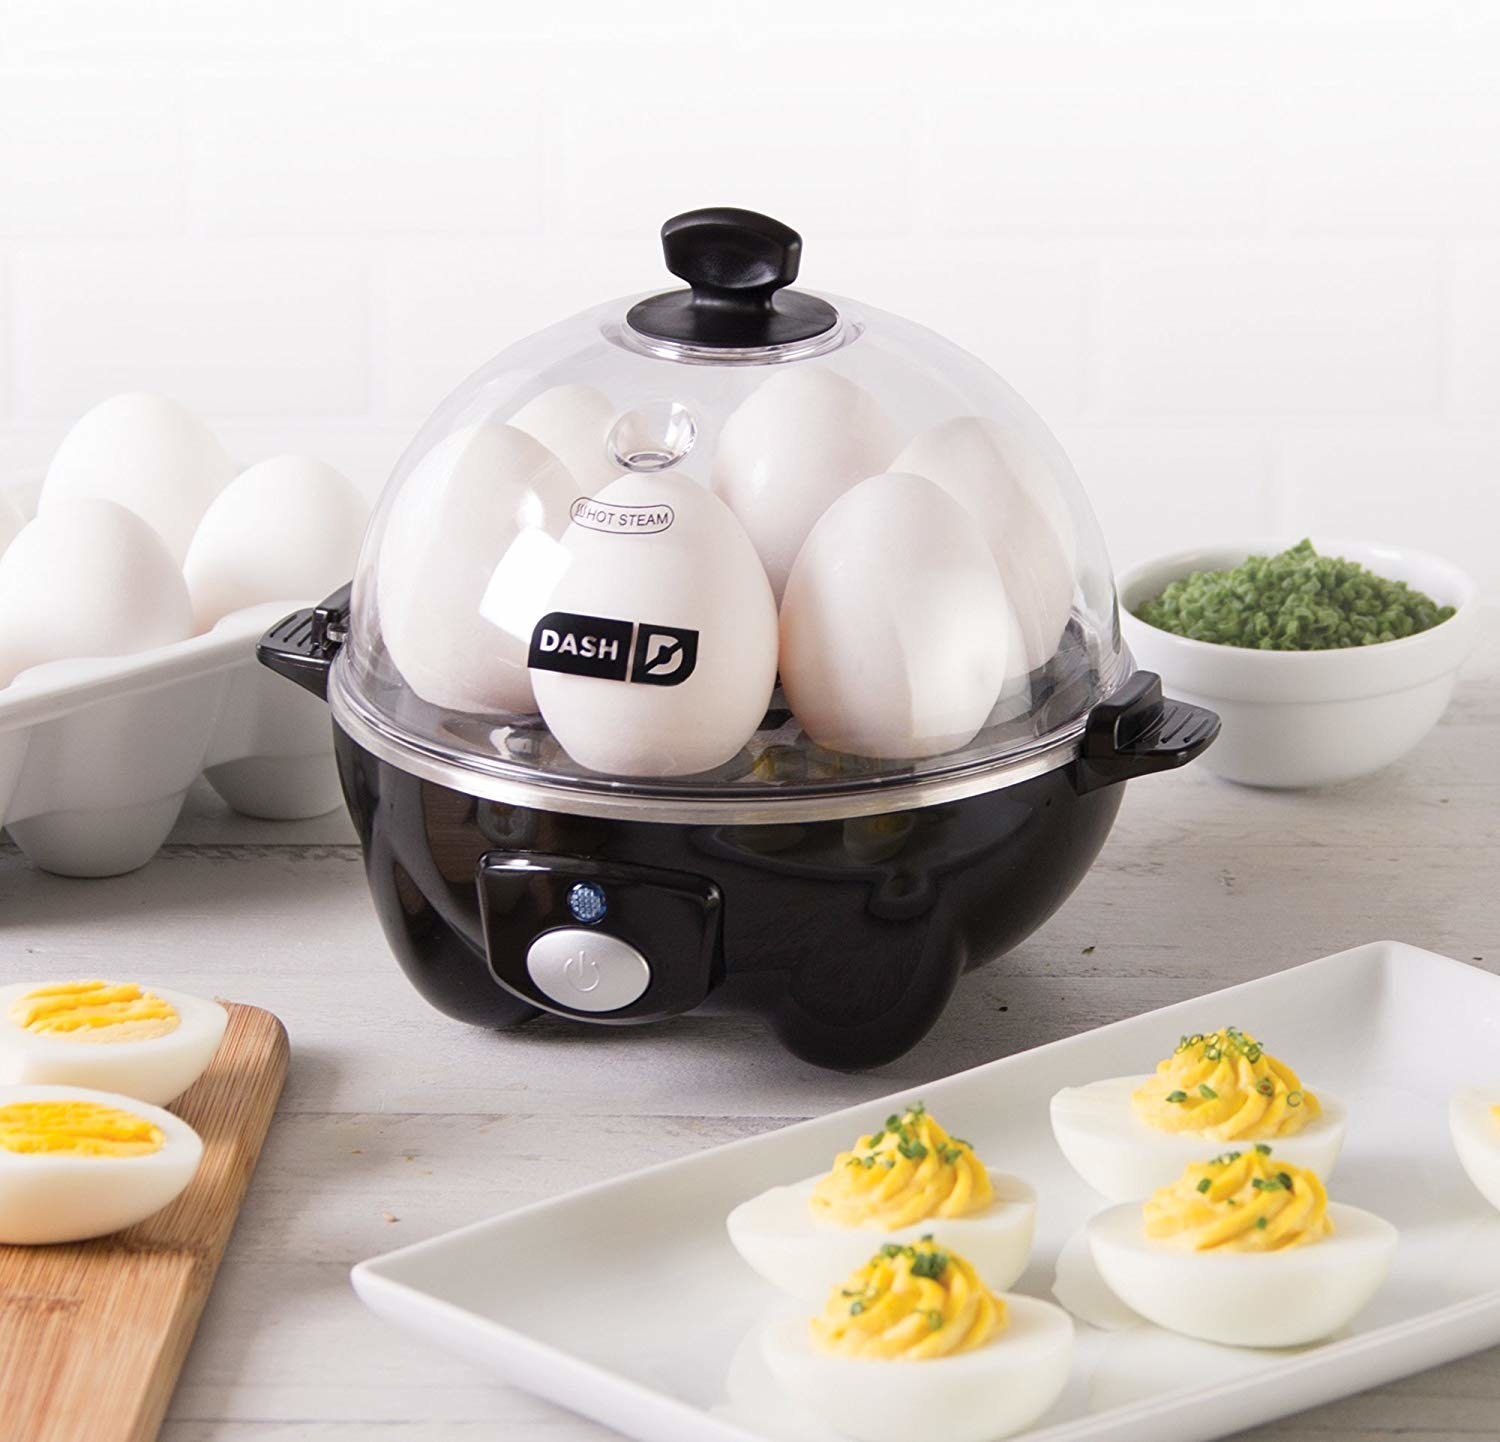 The egg cooker surrounded by deviled eggs